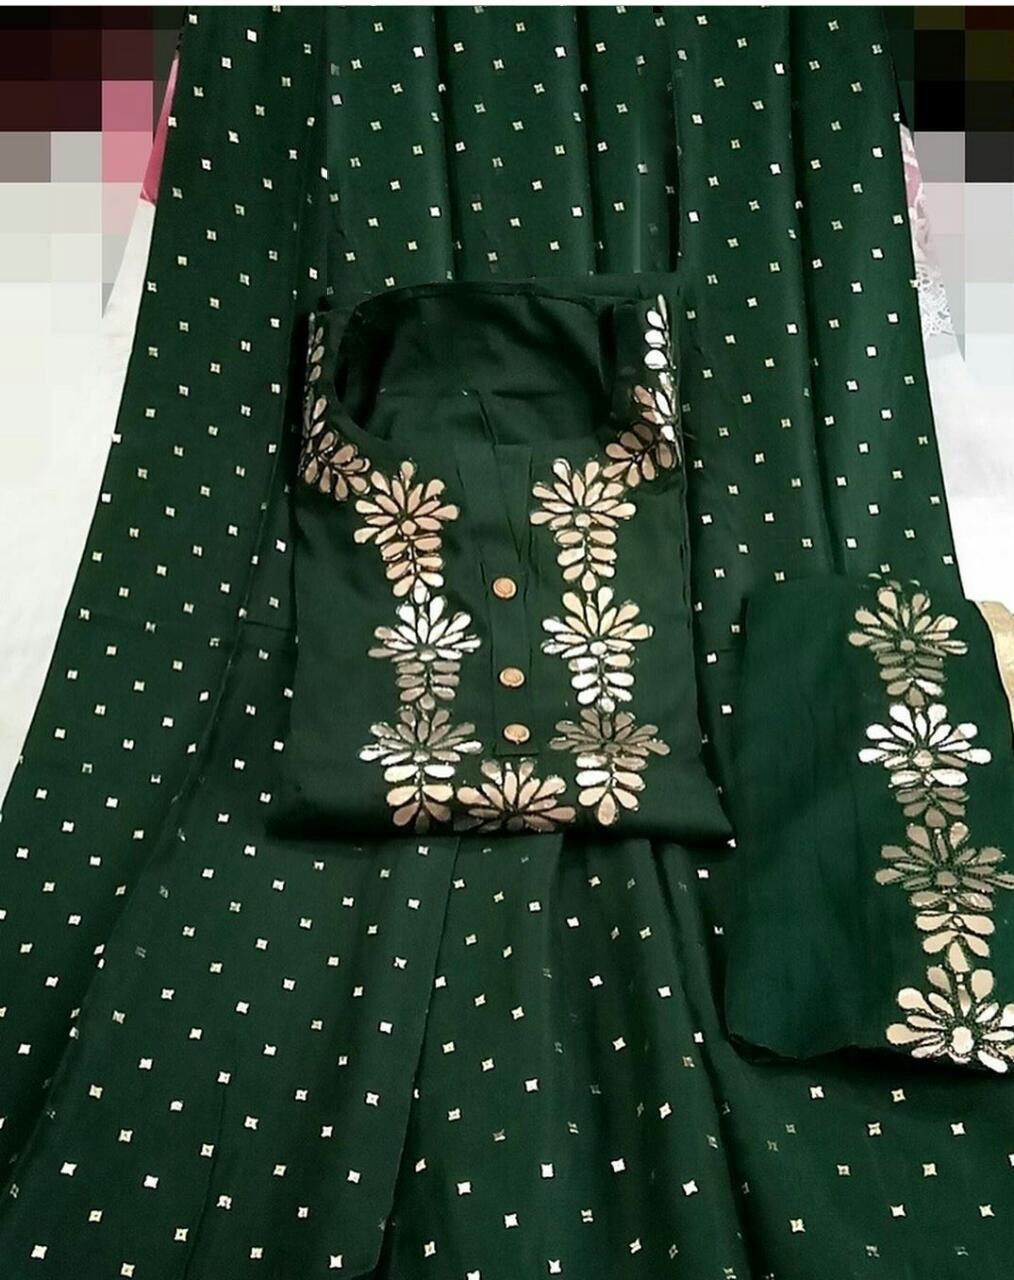 Dark Green Colored Rayon Cotton Kurti Full Stitched Palazo With Najmeen Dupatta For Party Wear VT3034102C